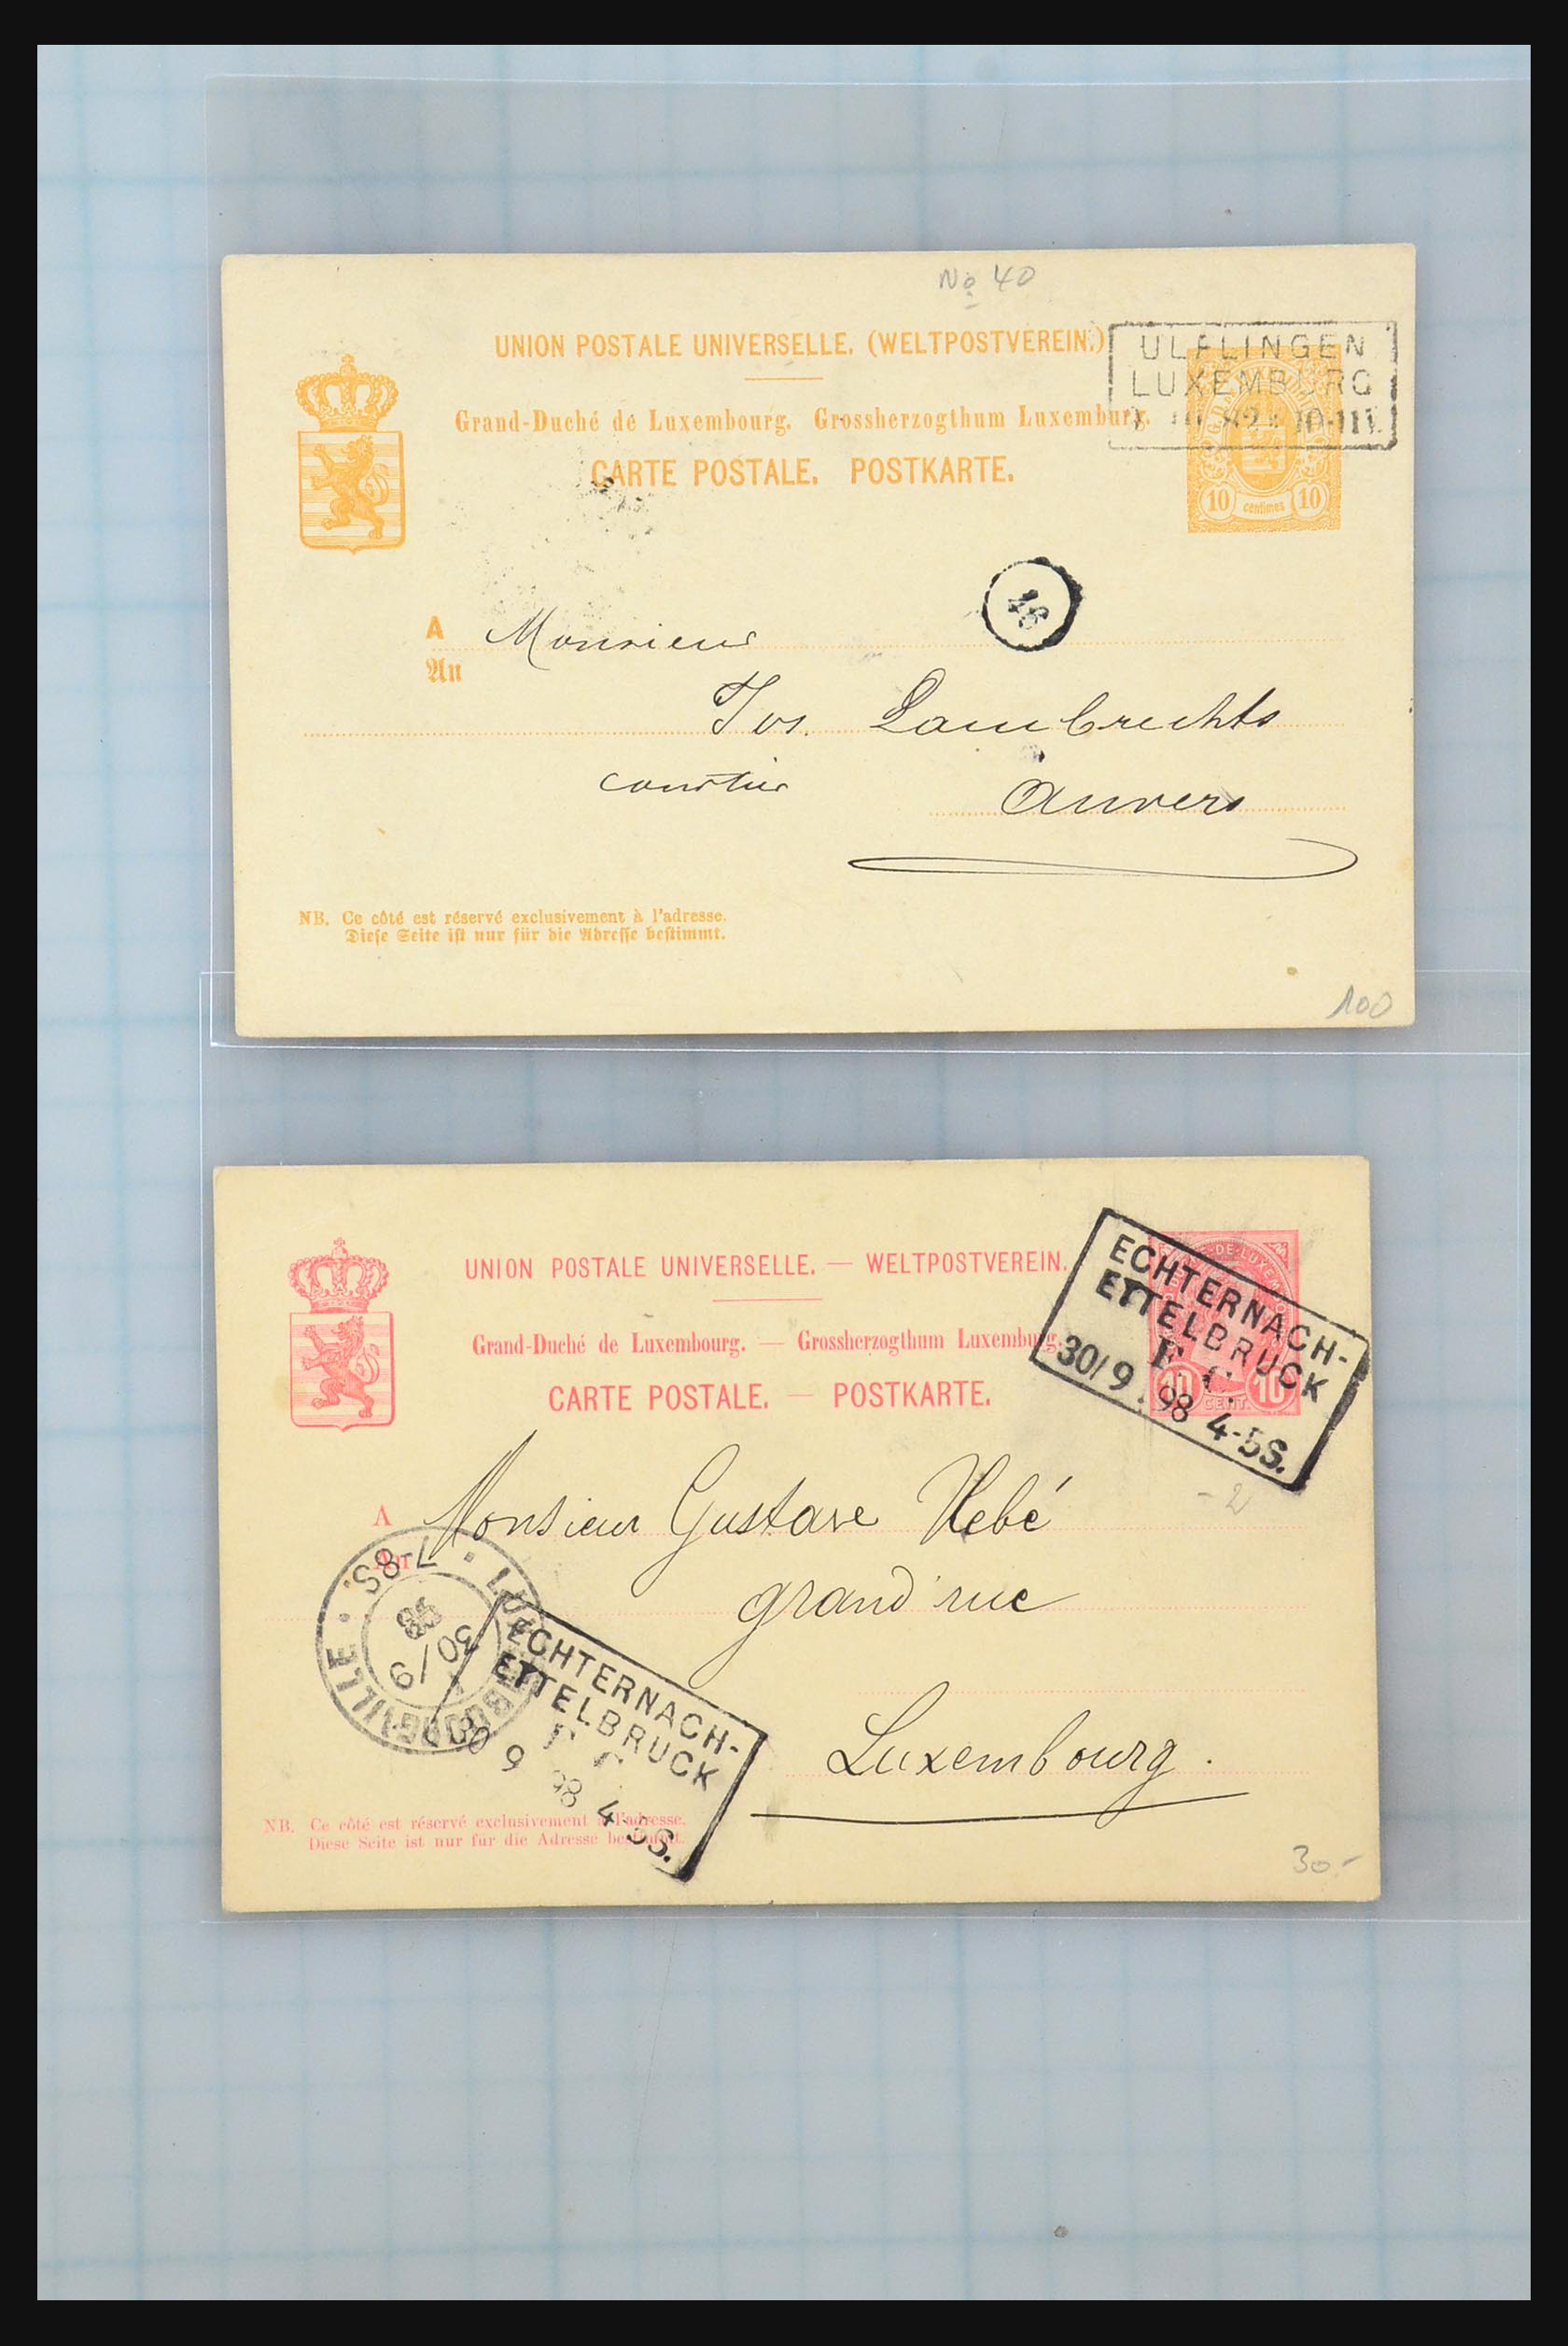 31358 057 - 31358 Portugal/Luxemburg/Greece covers 1880-1960.